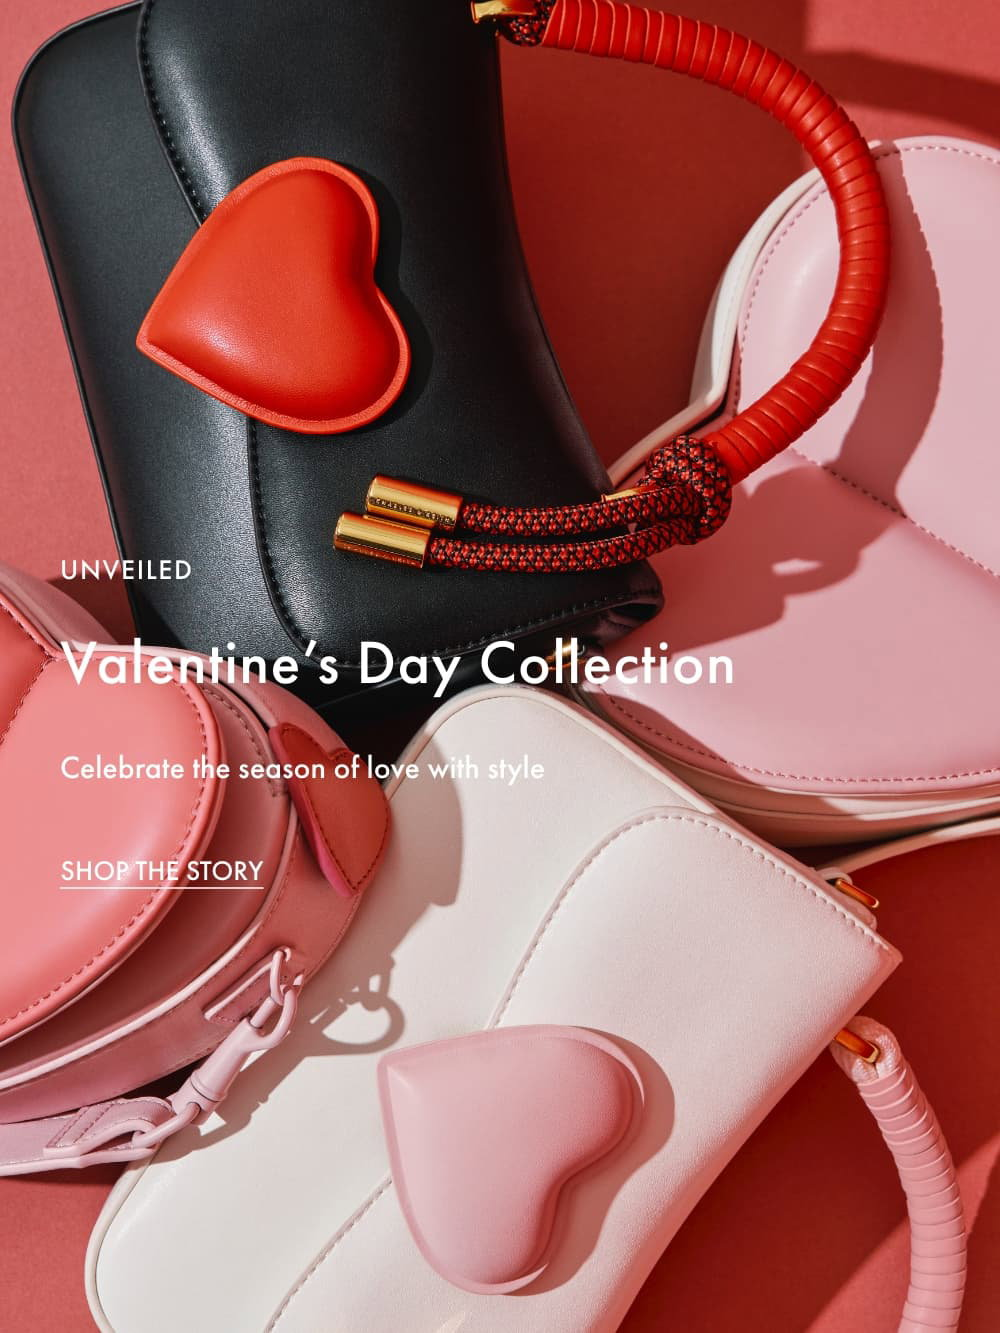 Charles & Keith Valentine's Day Collection Has Floral Bags & Heels